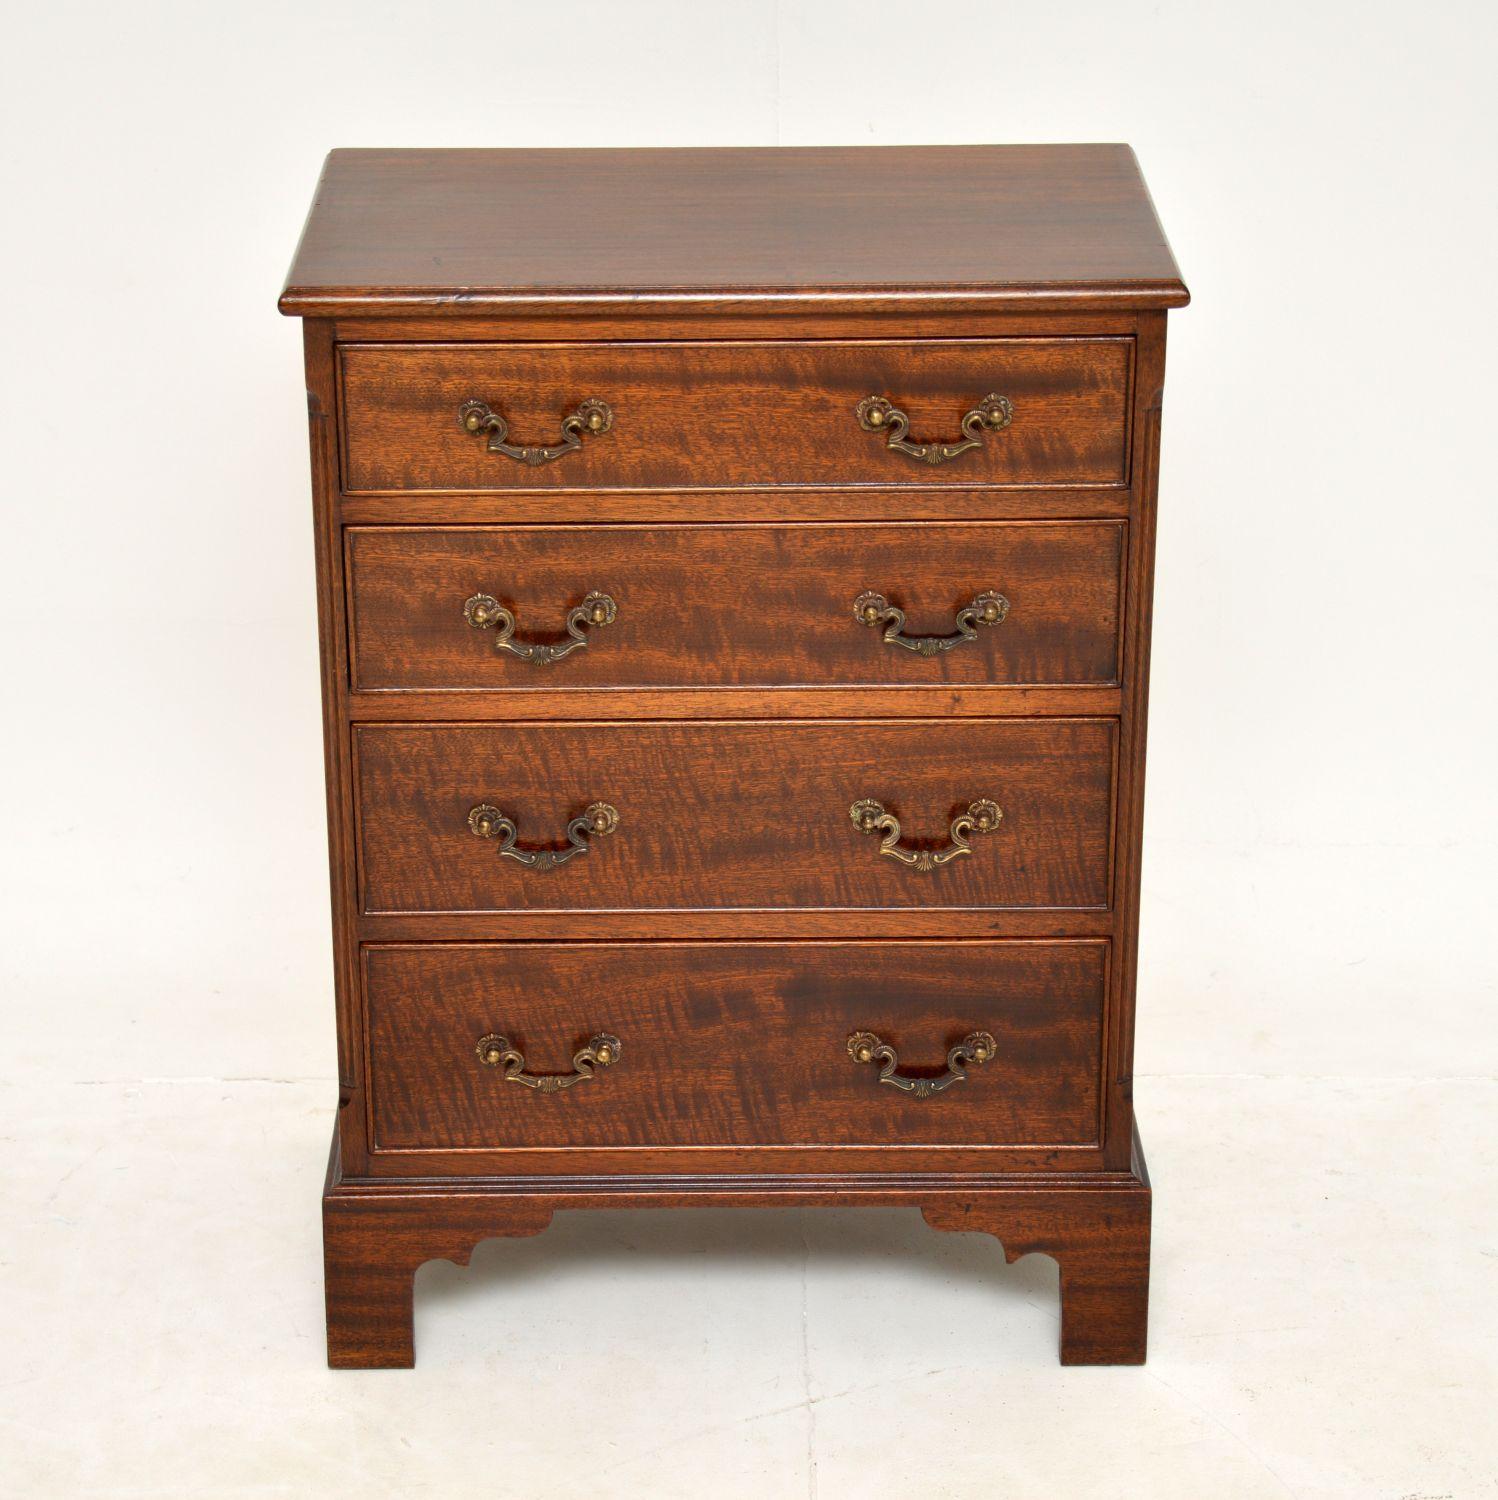 An excellent chest of drawers in the antique Georgian style. This was made in England, it dates from around the 1950’s period.

It is is a very useful size, not taking up much space yet offering lots of storage space. It sits on bracket feet, has